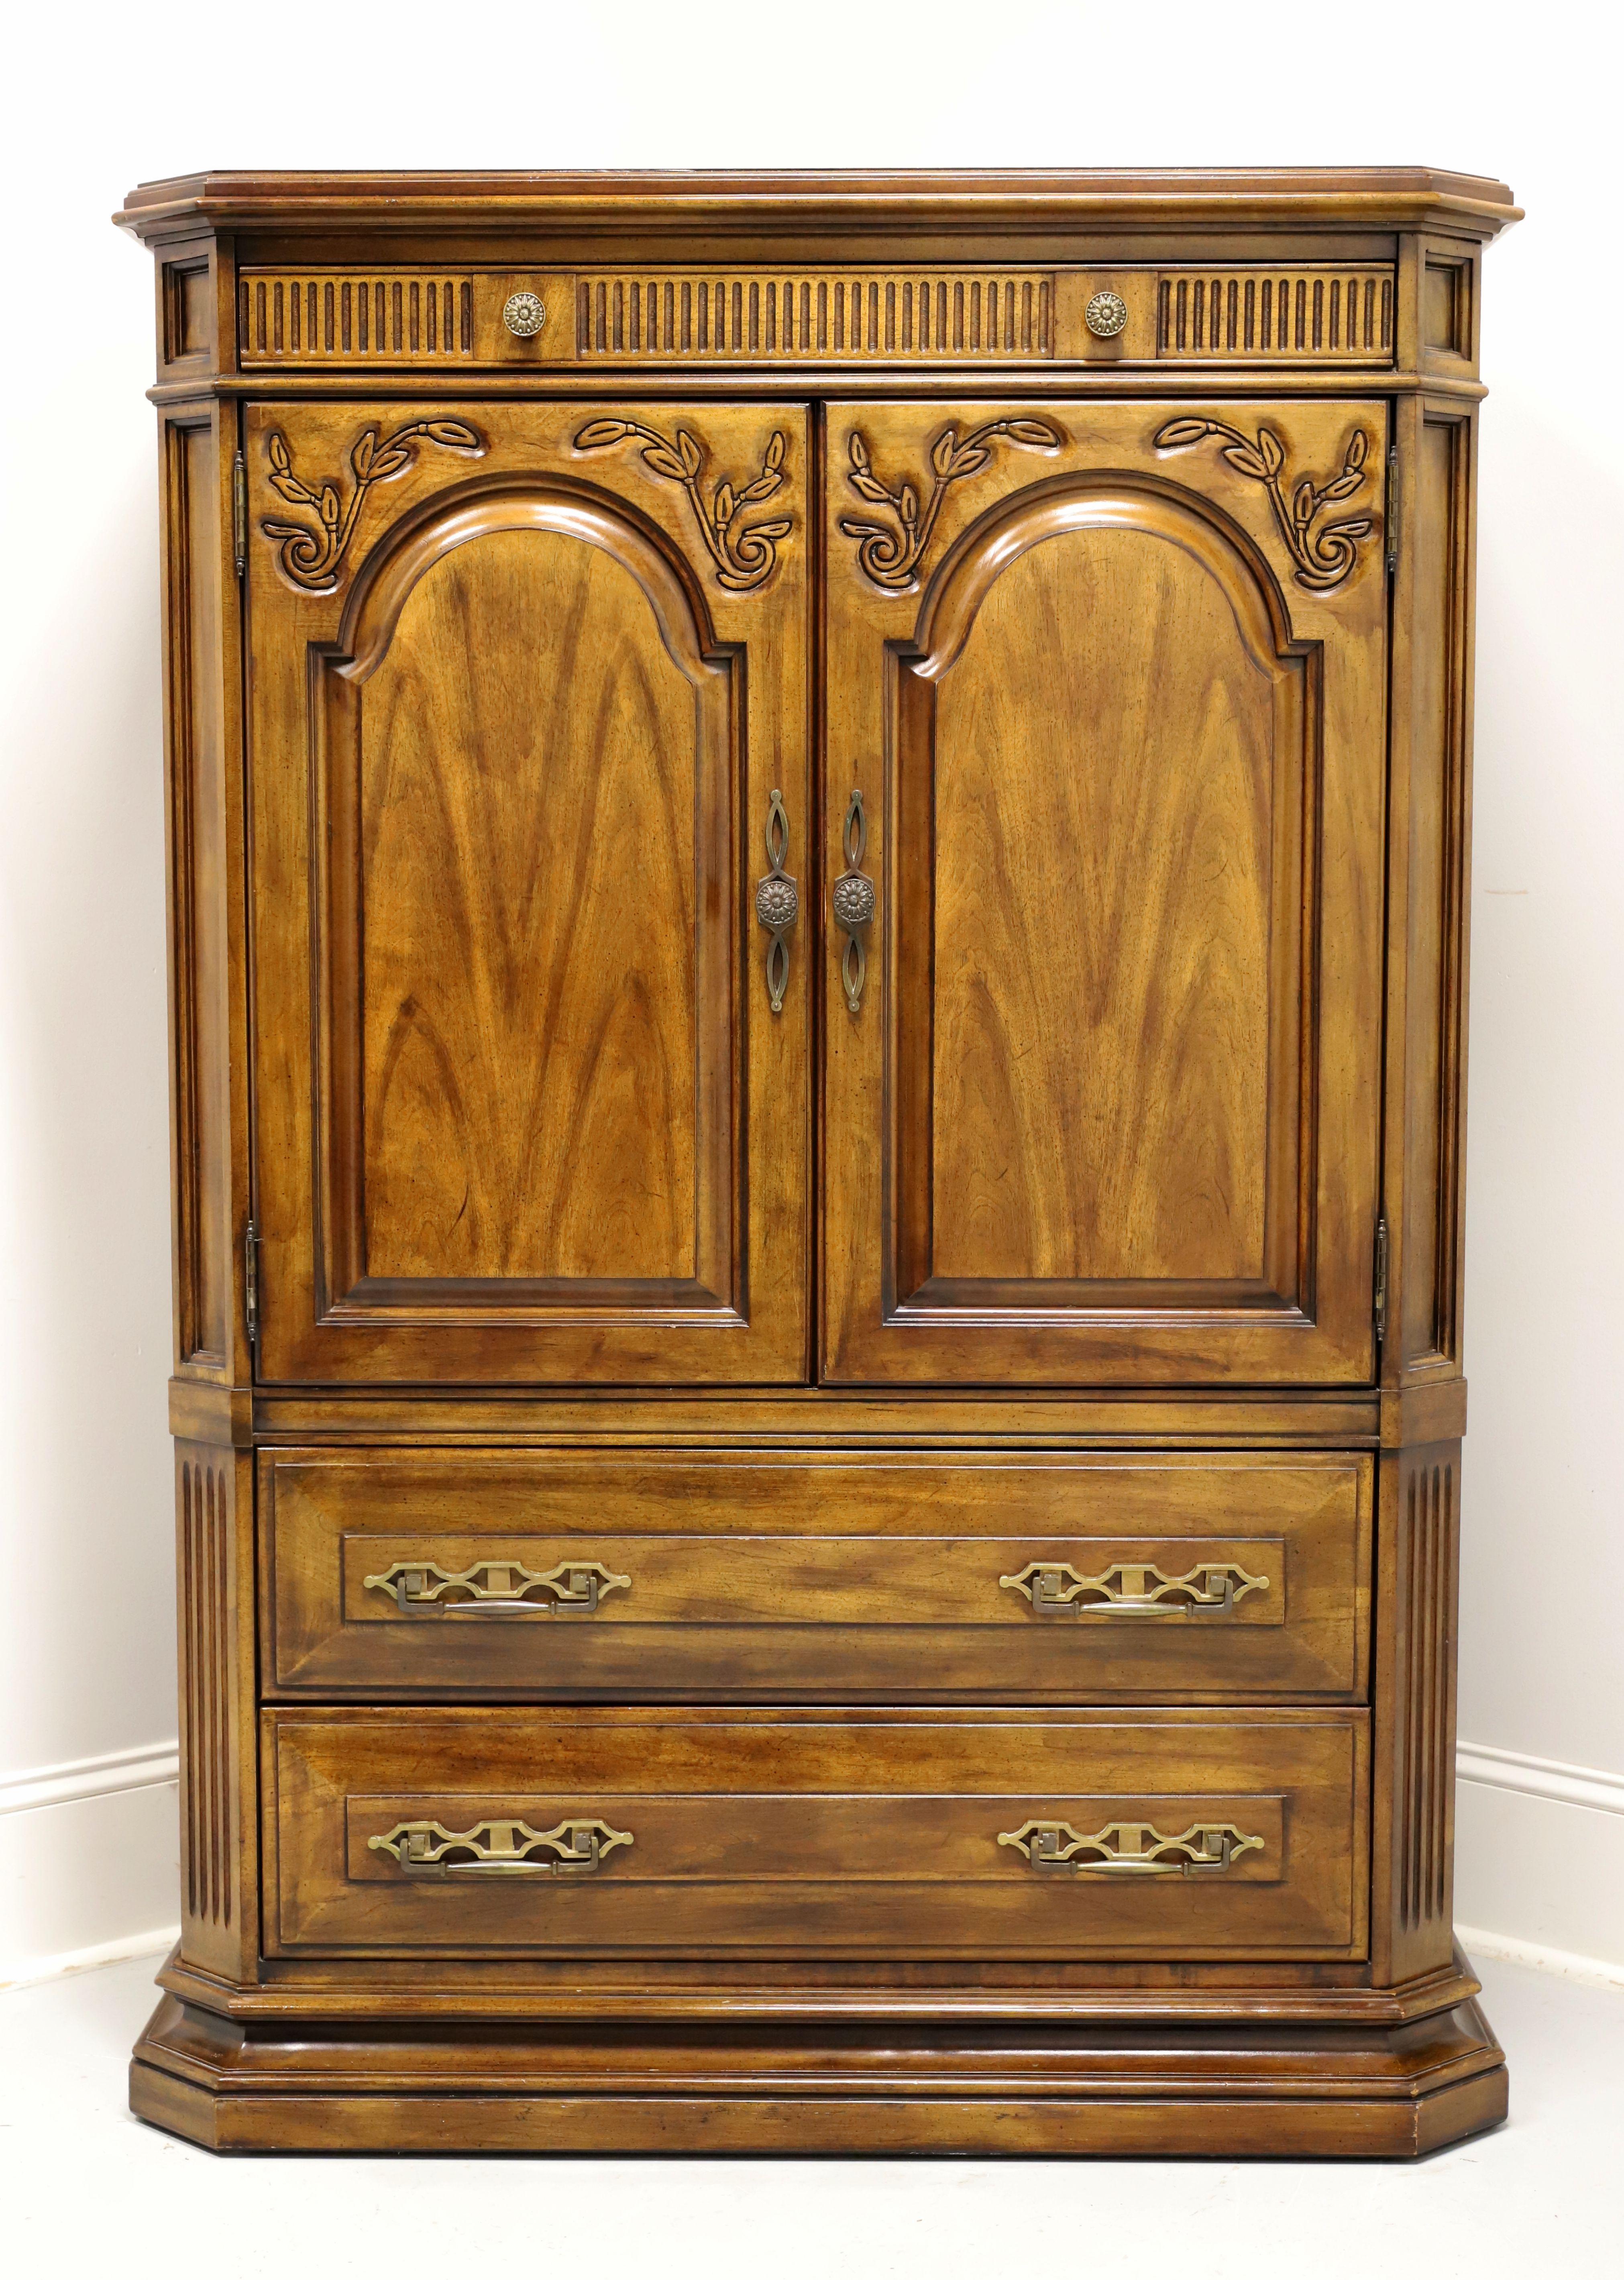 A French Country style gentleman's chest by White Furniture. Solid cherry wood with slightly distressed finish, ogee edge to the top, brass hardware, decoratively carved frieze over doors that conceals a hidden drawer, raised door & drawer fronts,